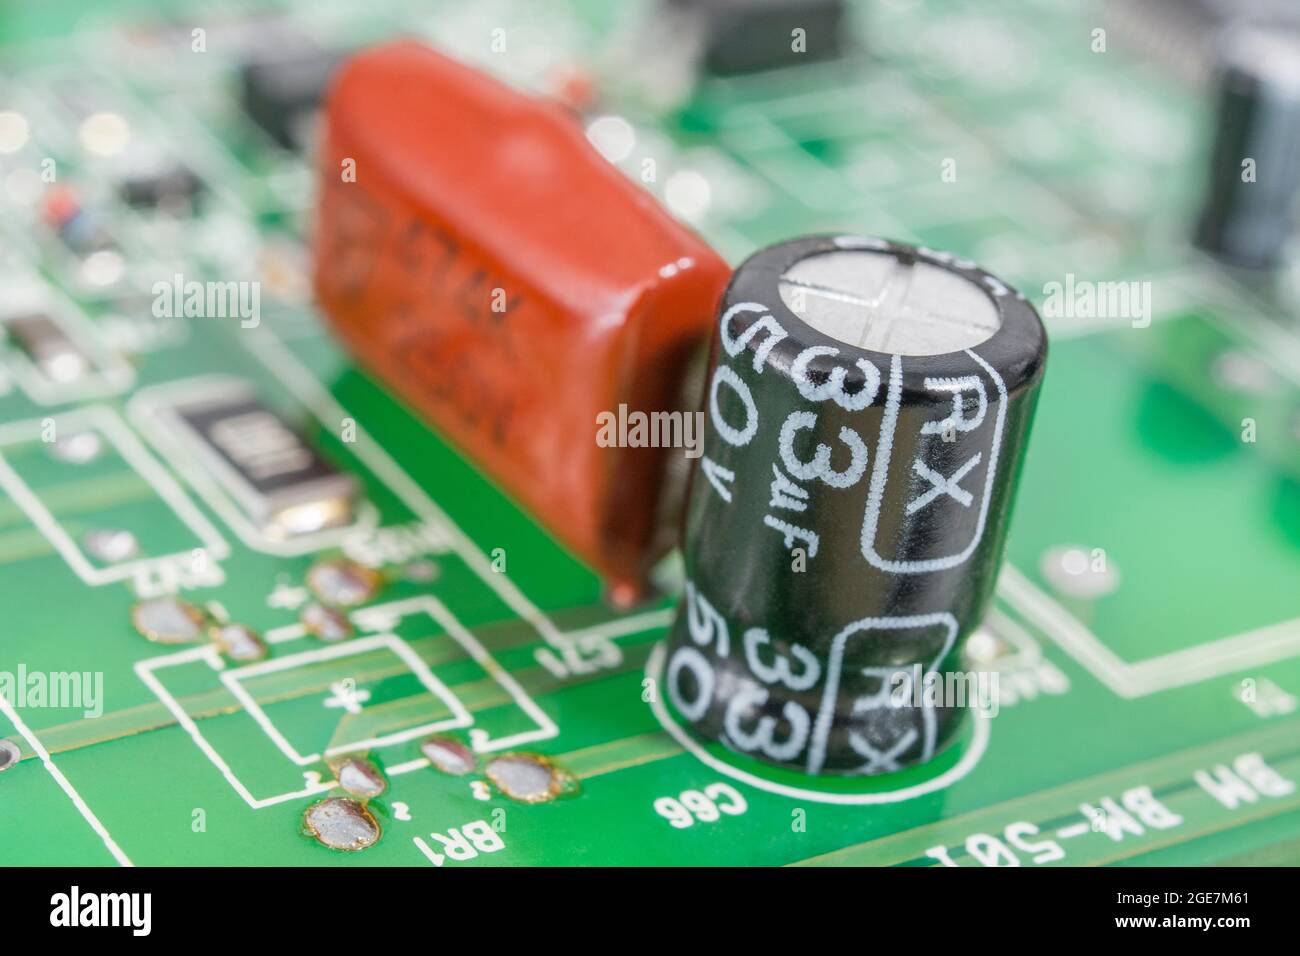 Close-up shot of aluminium electrolytic capacitor on pcb, showing component  rating marking and vent, with dipped film capacitor. Brands unidentified  Stock Photo - Alamy